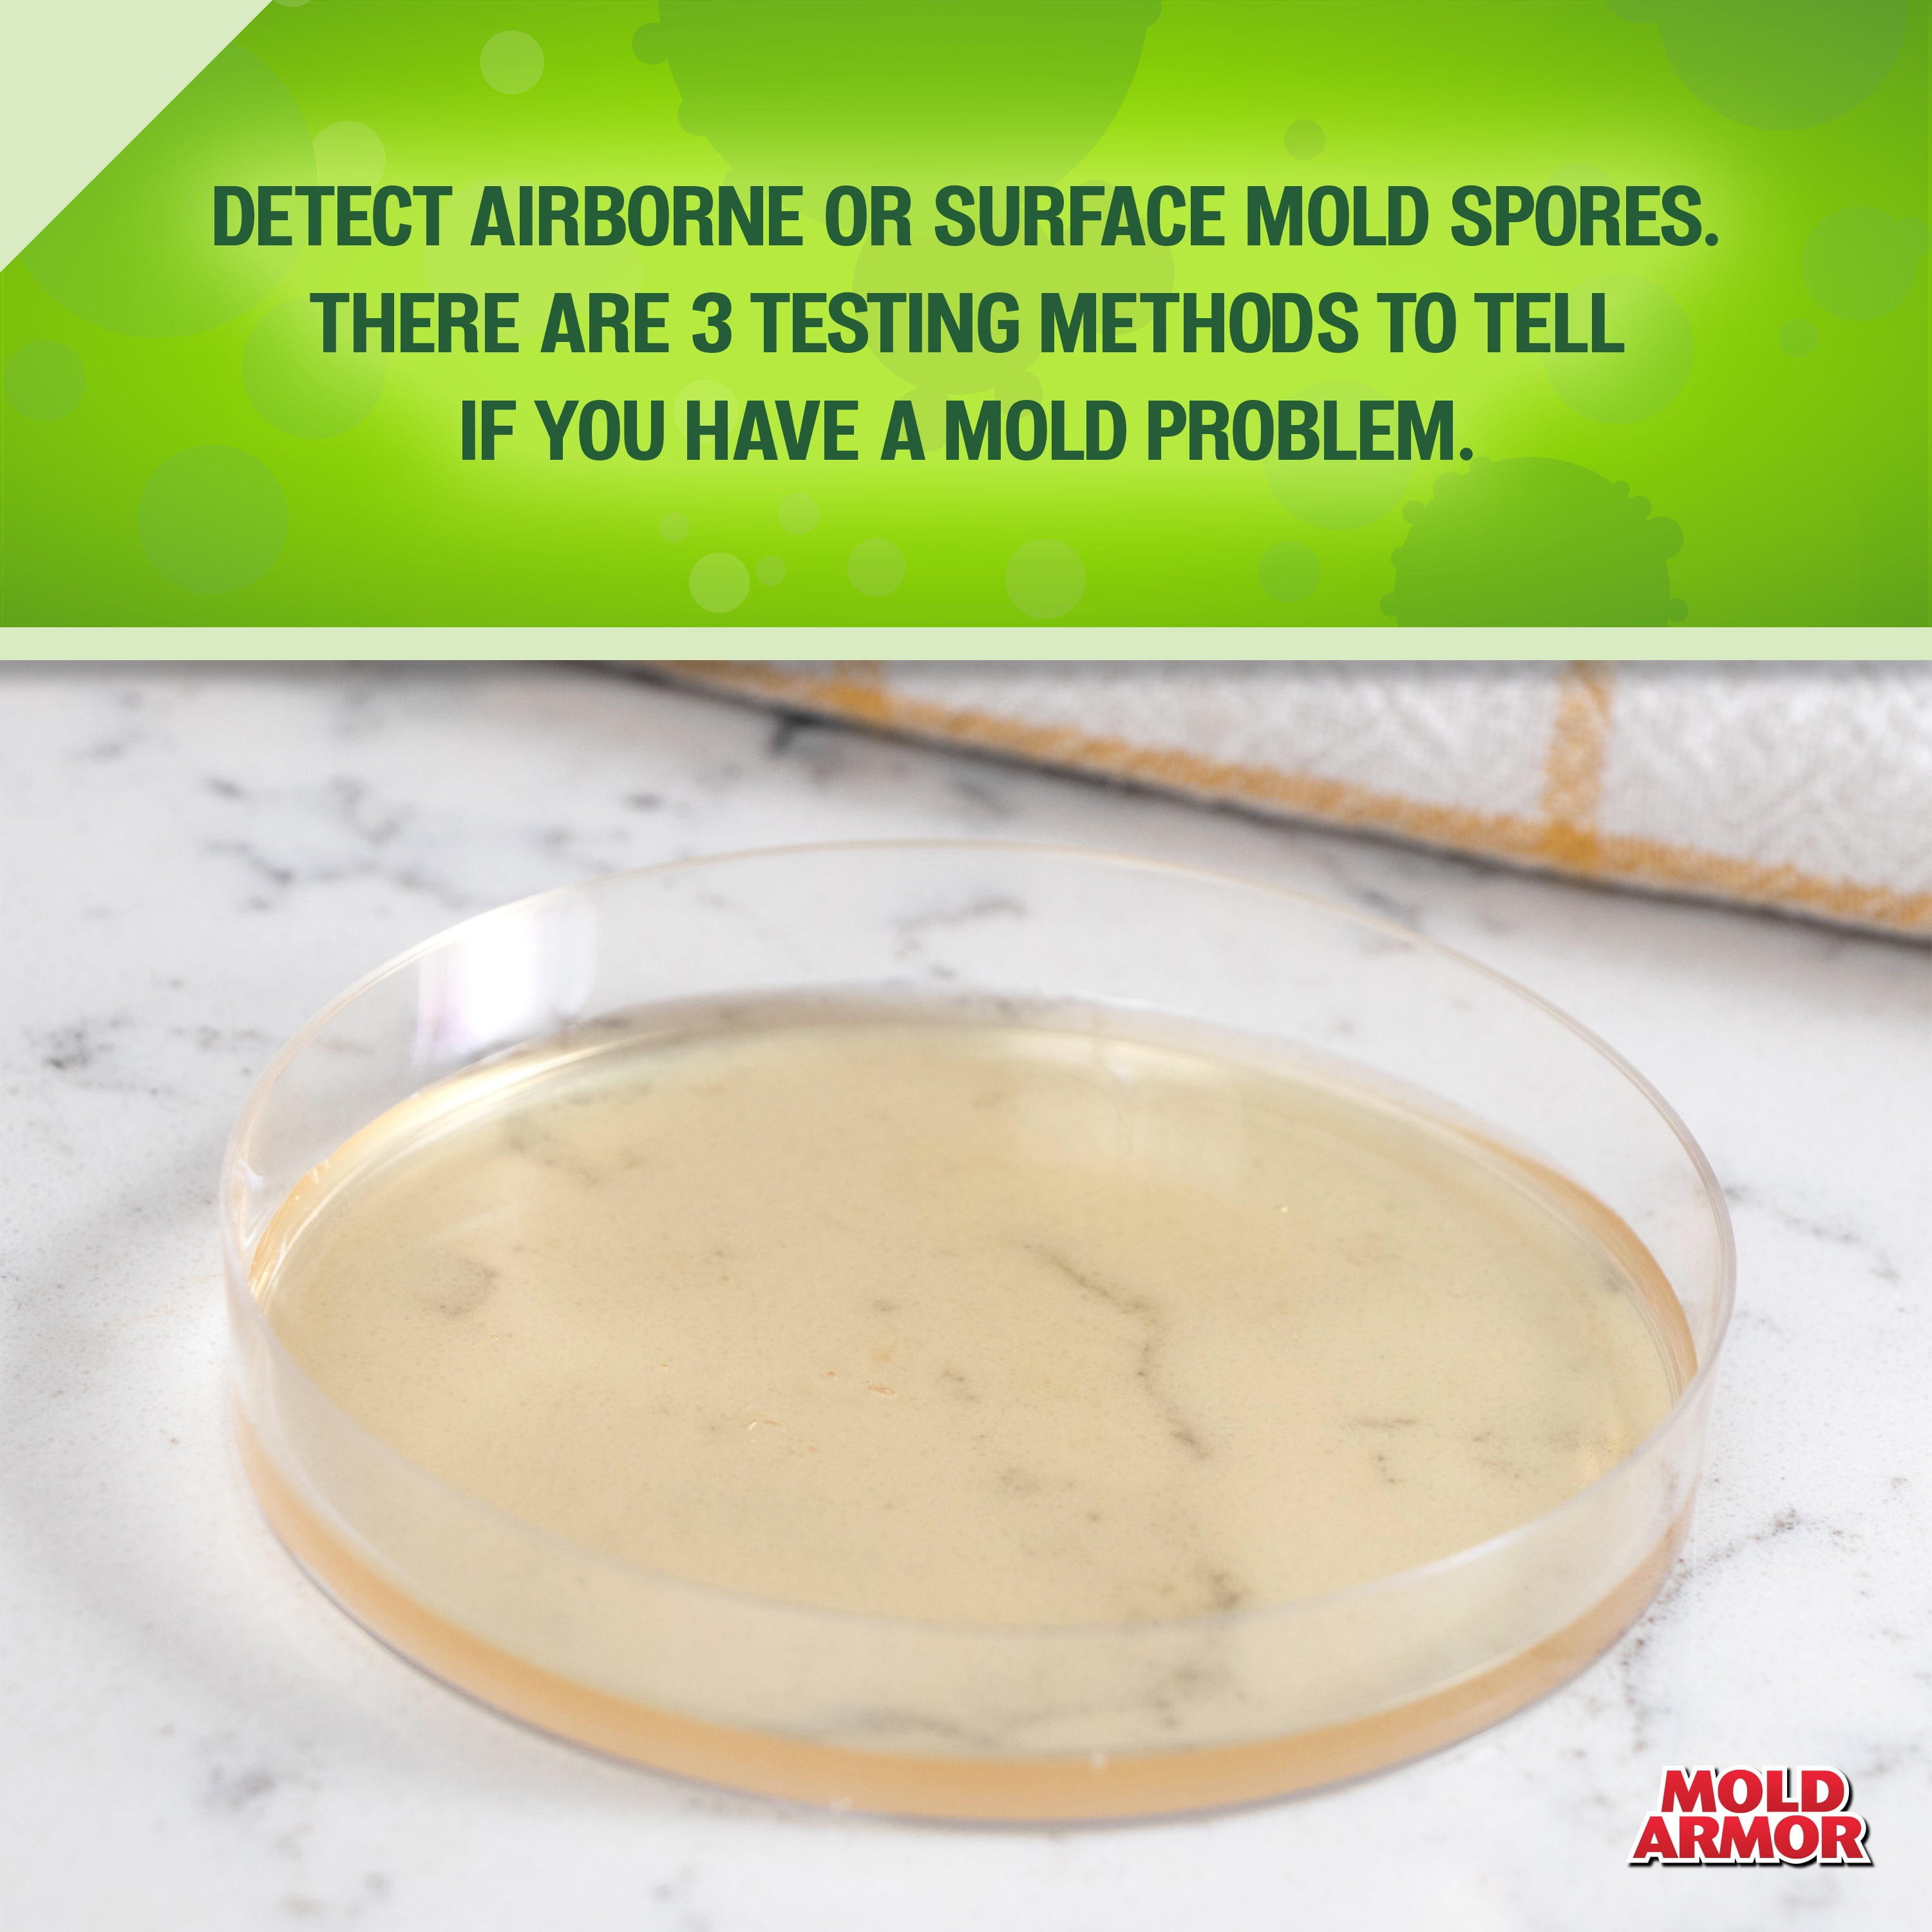 Mold Test Kit for Home - Buy Online, Easy to Use